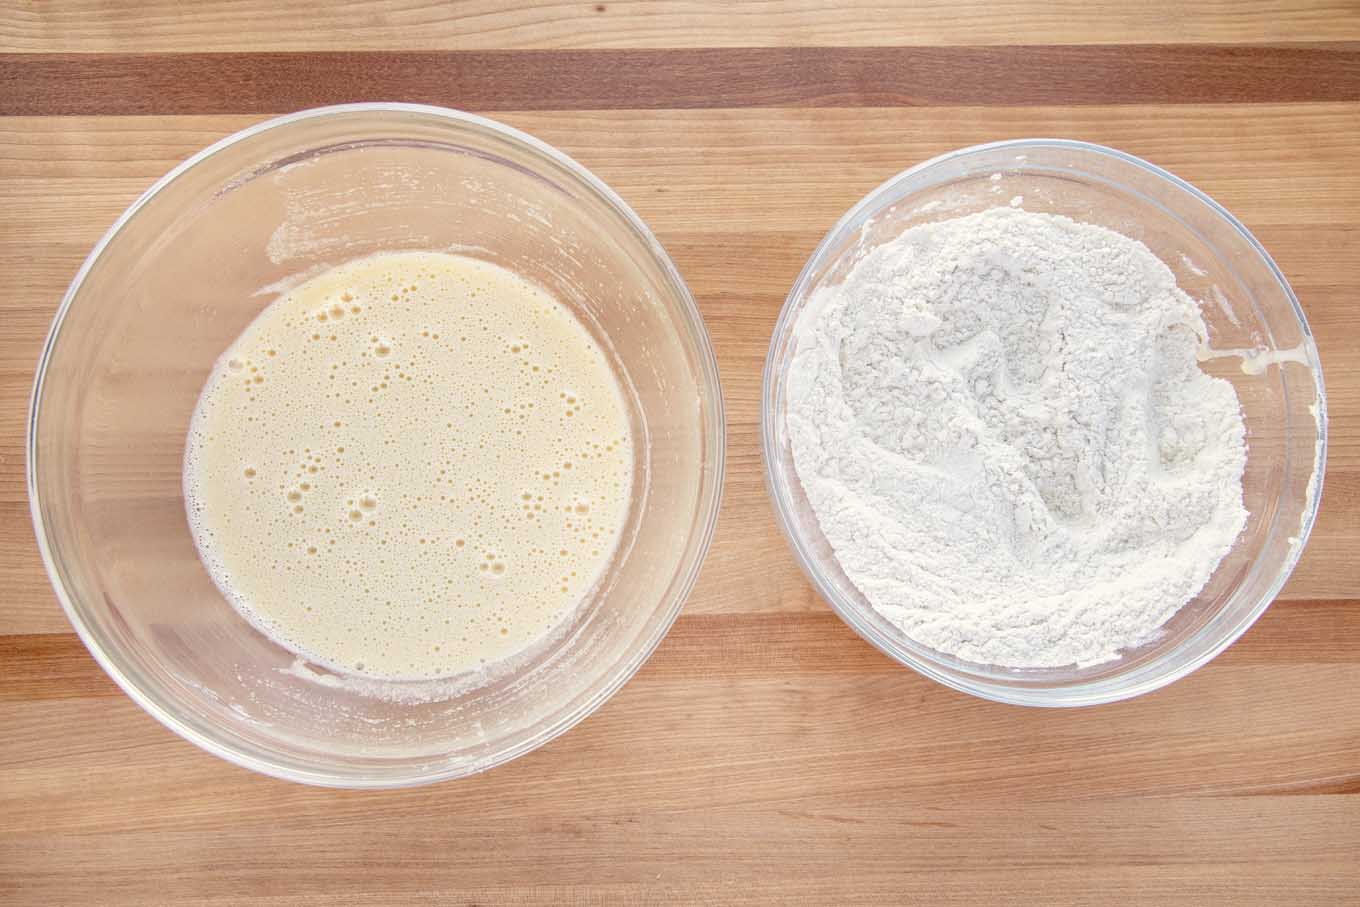 egg mixture and flour mixture in glass bowls